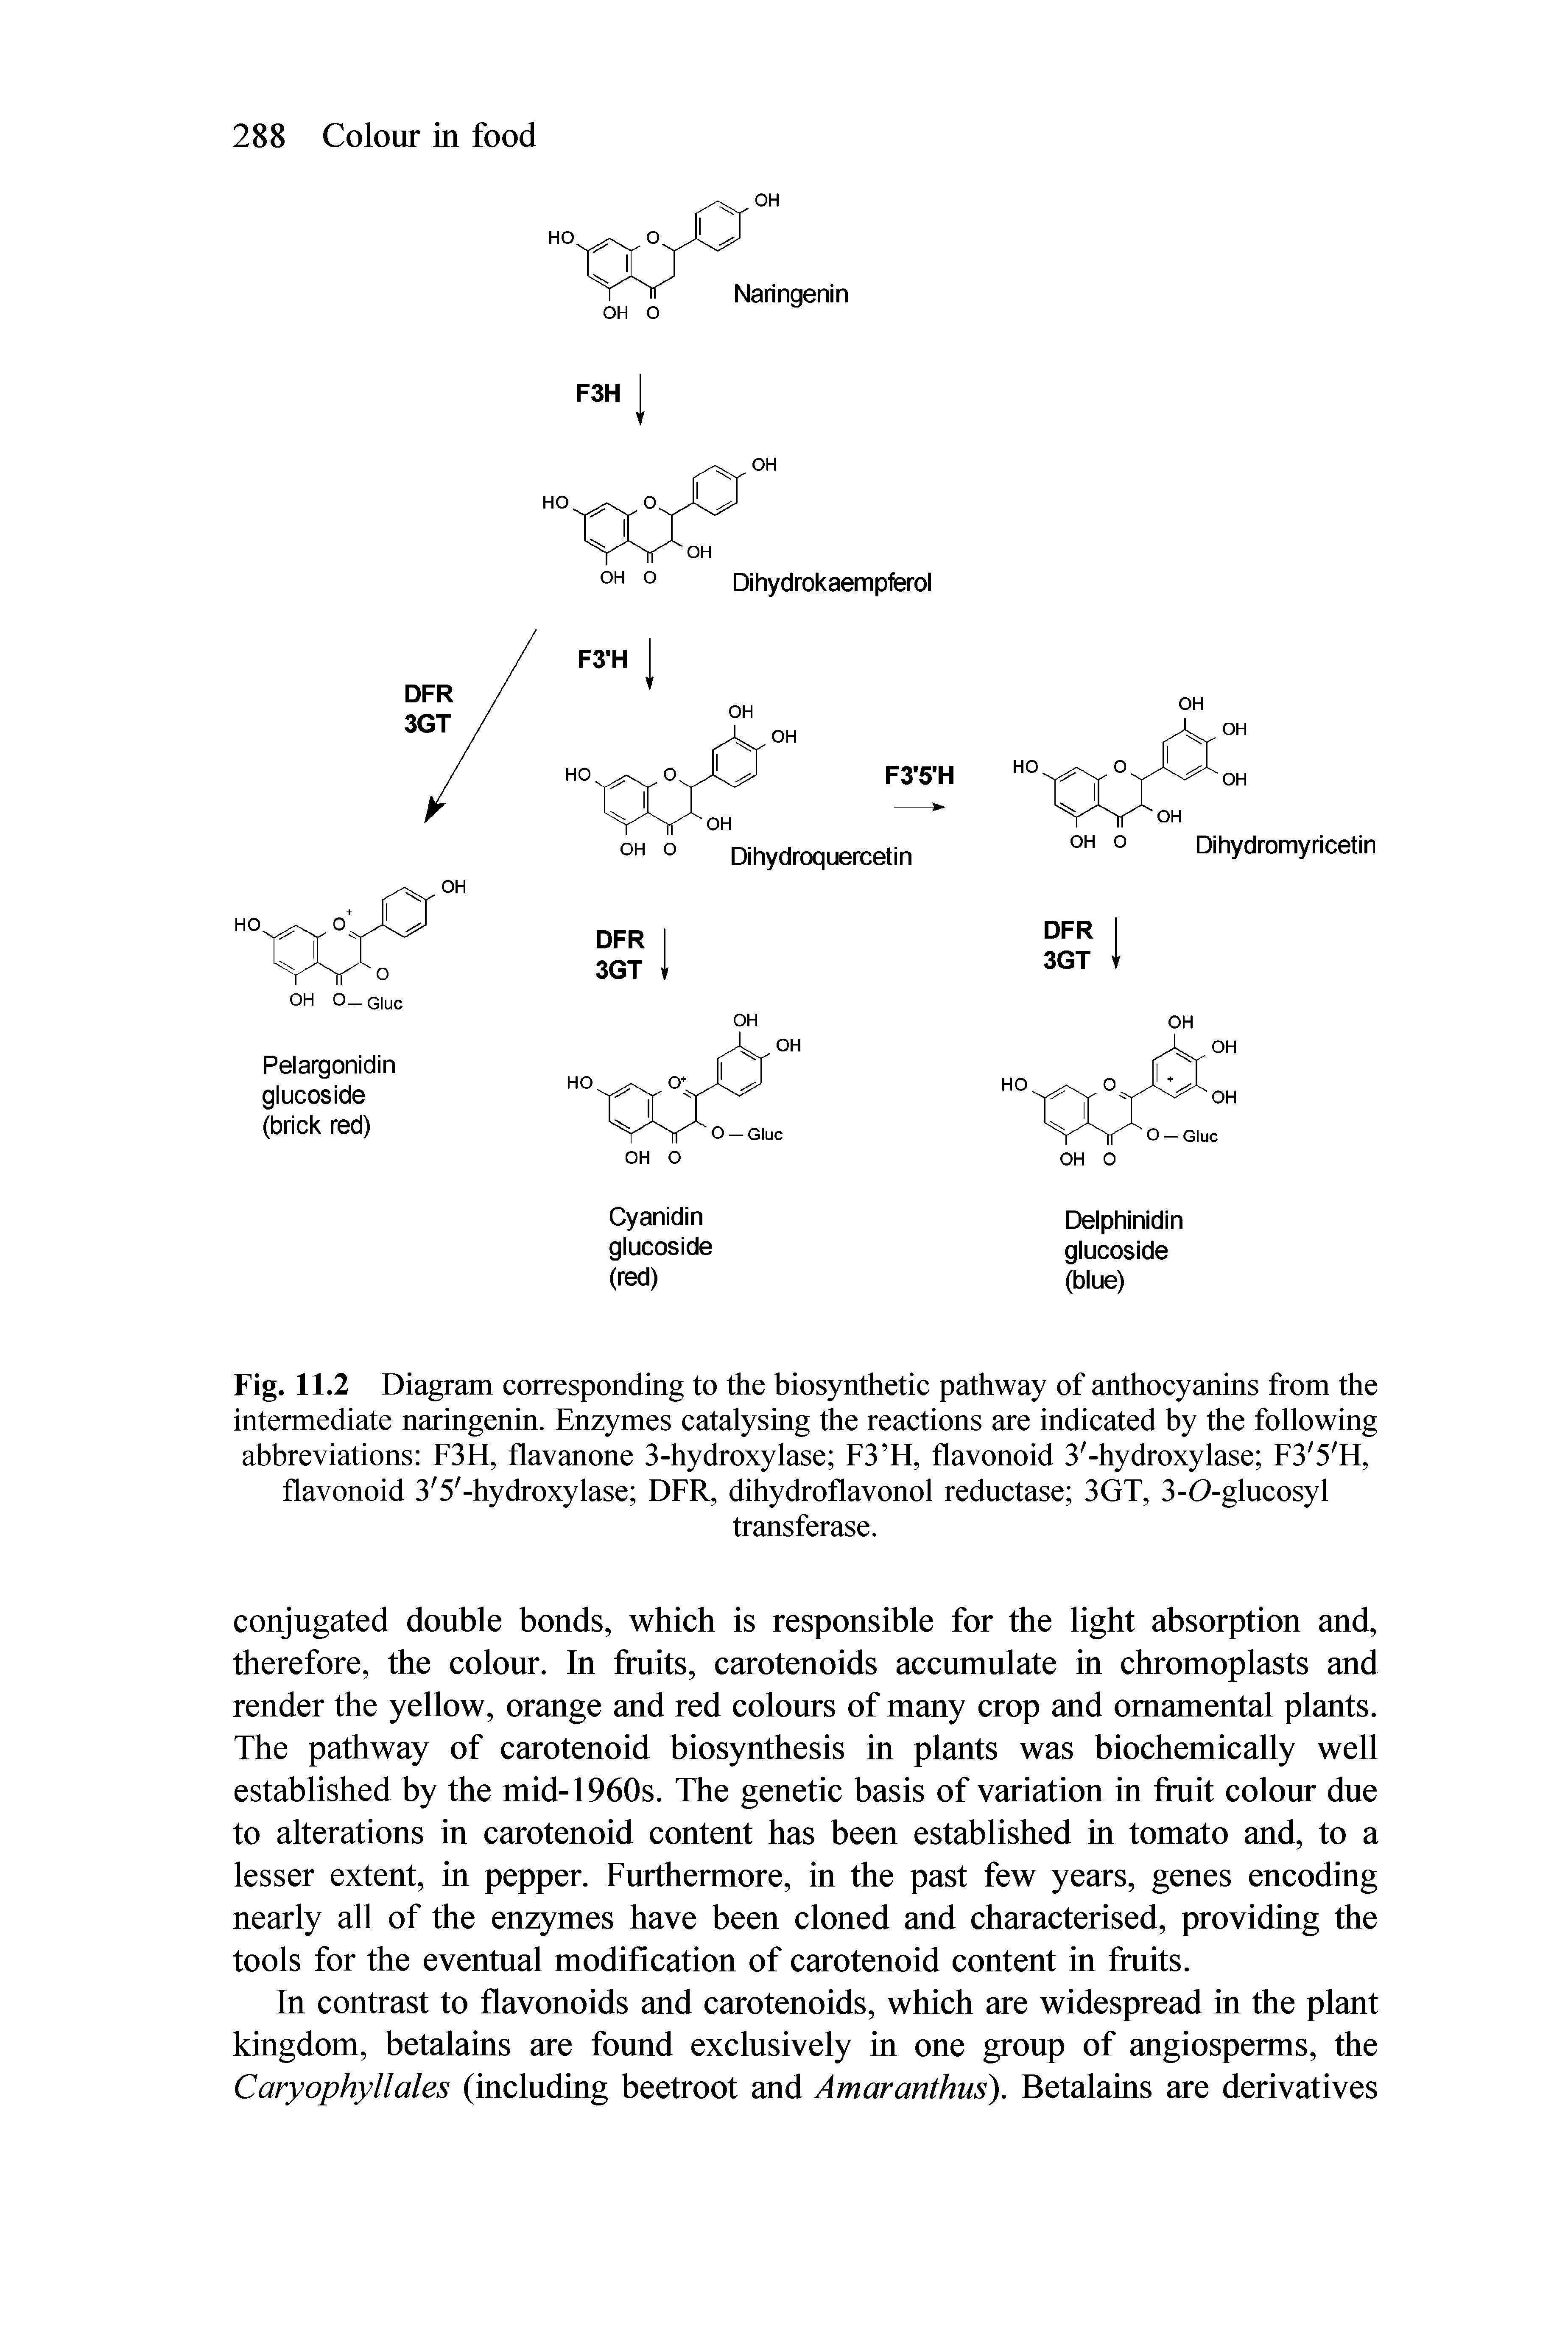 Fig. 11.2 Diagram corresponding to the biosynthetic pathway of anthocyanins from the intermediate naringenin. Enzymes catalysing the reactions are indicated by the following abbreviations F3H, flavanone 3-hydroxylase F3 H, flavonoid 3 -hydroxylase F3 5 H, flavonoid 3 5 -hydroxylase DFR, dihydroflavonol reductase 3GT, 3-O-glucosyl...